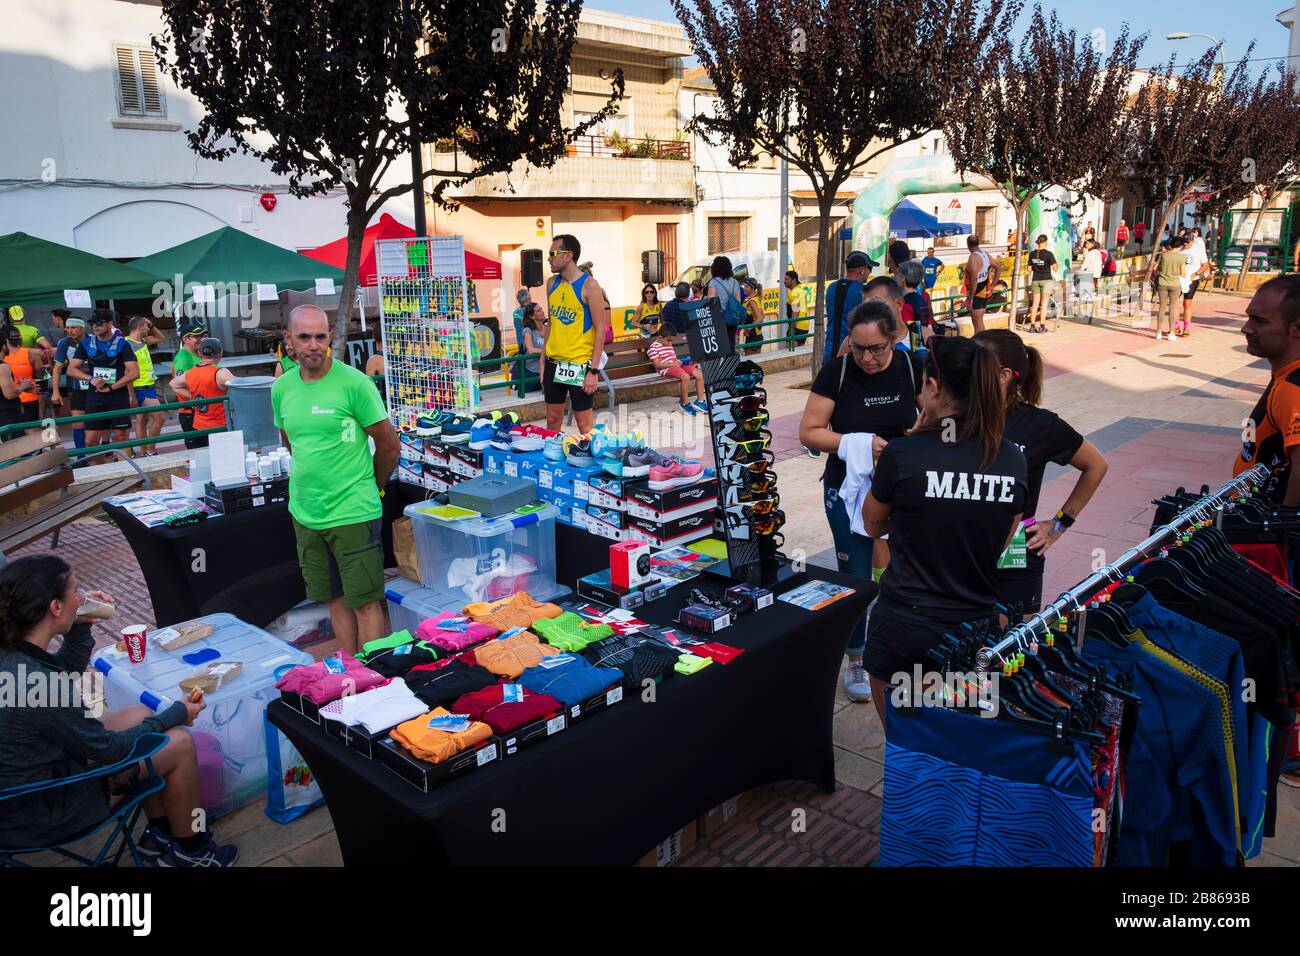 Market stall selling running gear at the start of cross country race in the La Safor Mountains of Spain Stock Photo